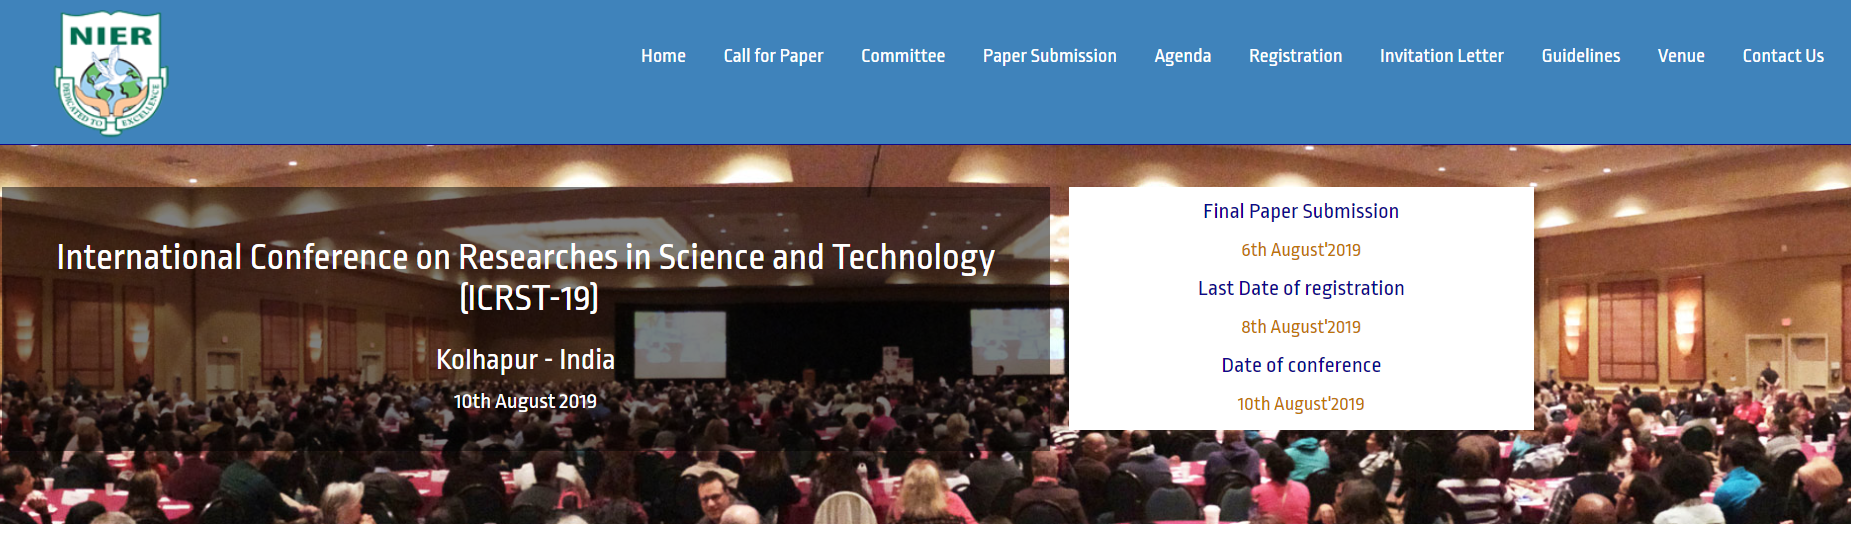 International Conference on Researches in Science and Technology  (ICRST-19), Kolhapur, Maharashtra, India